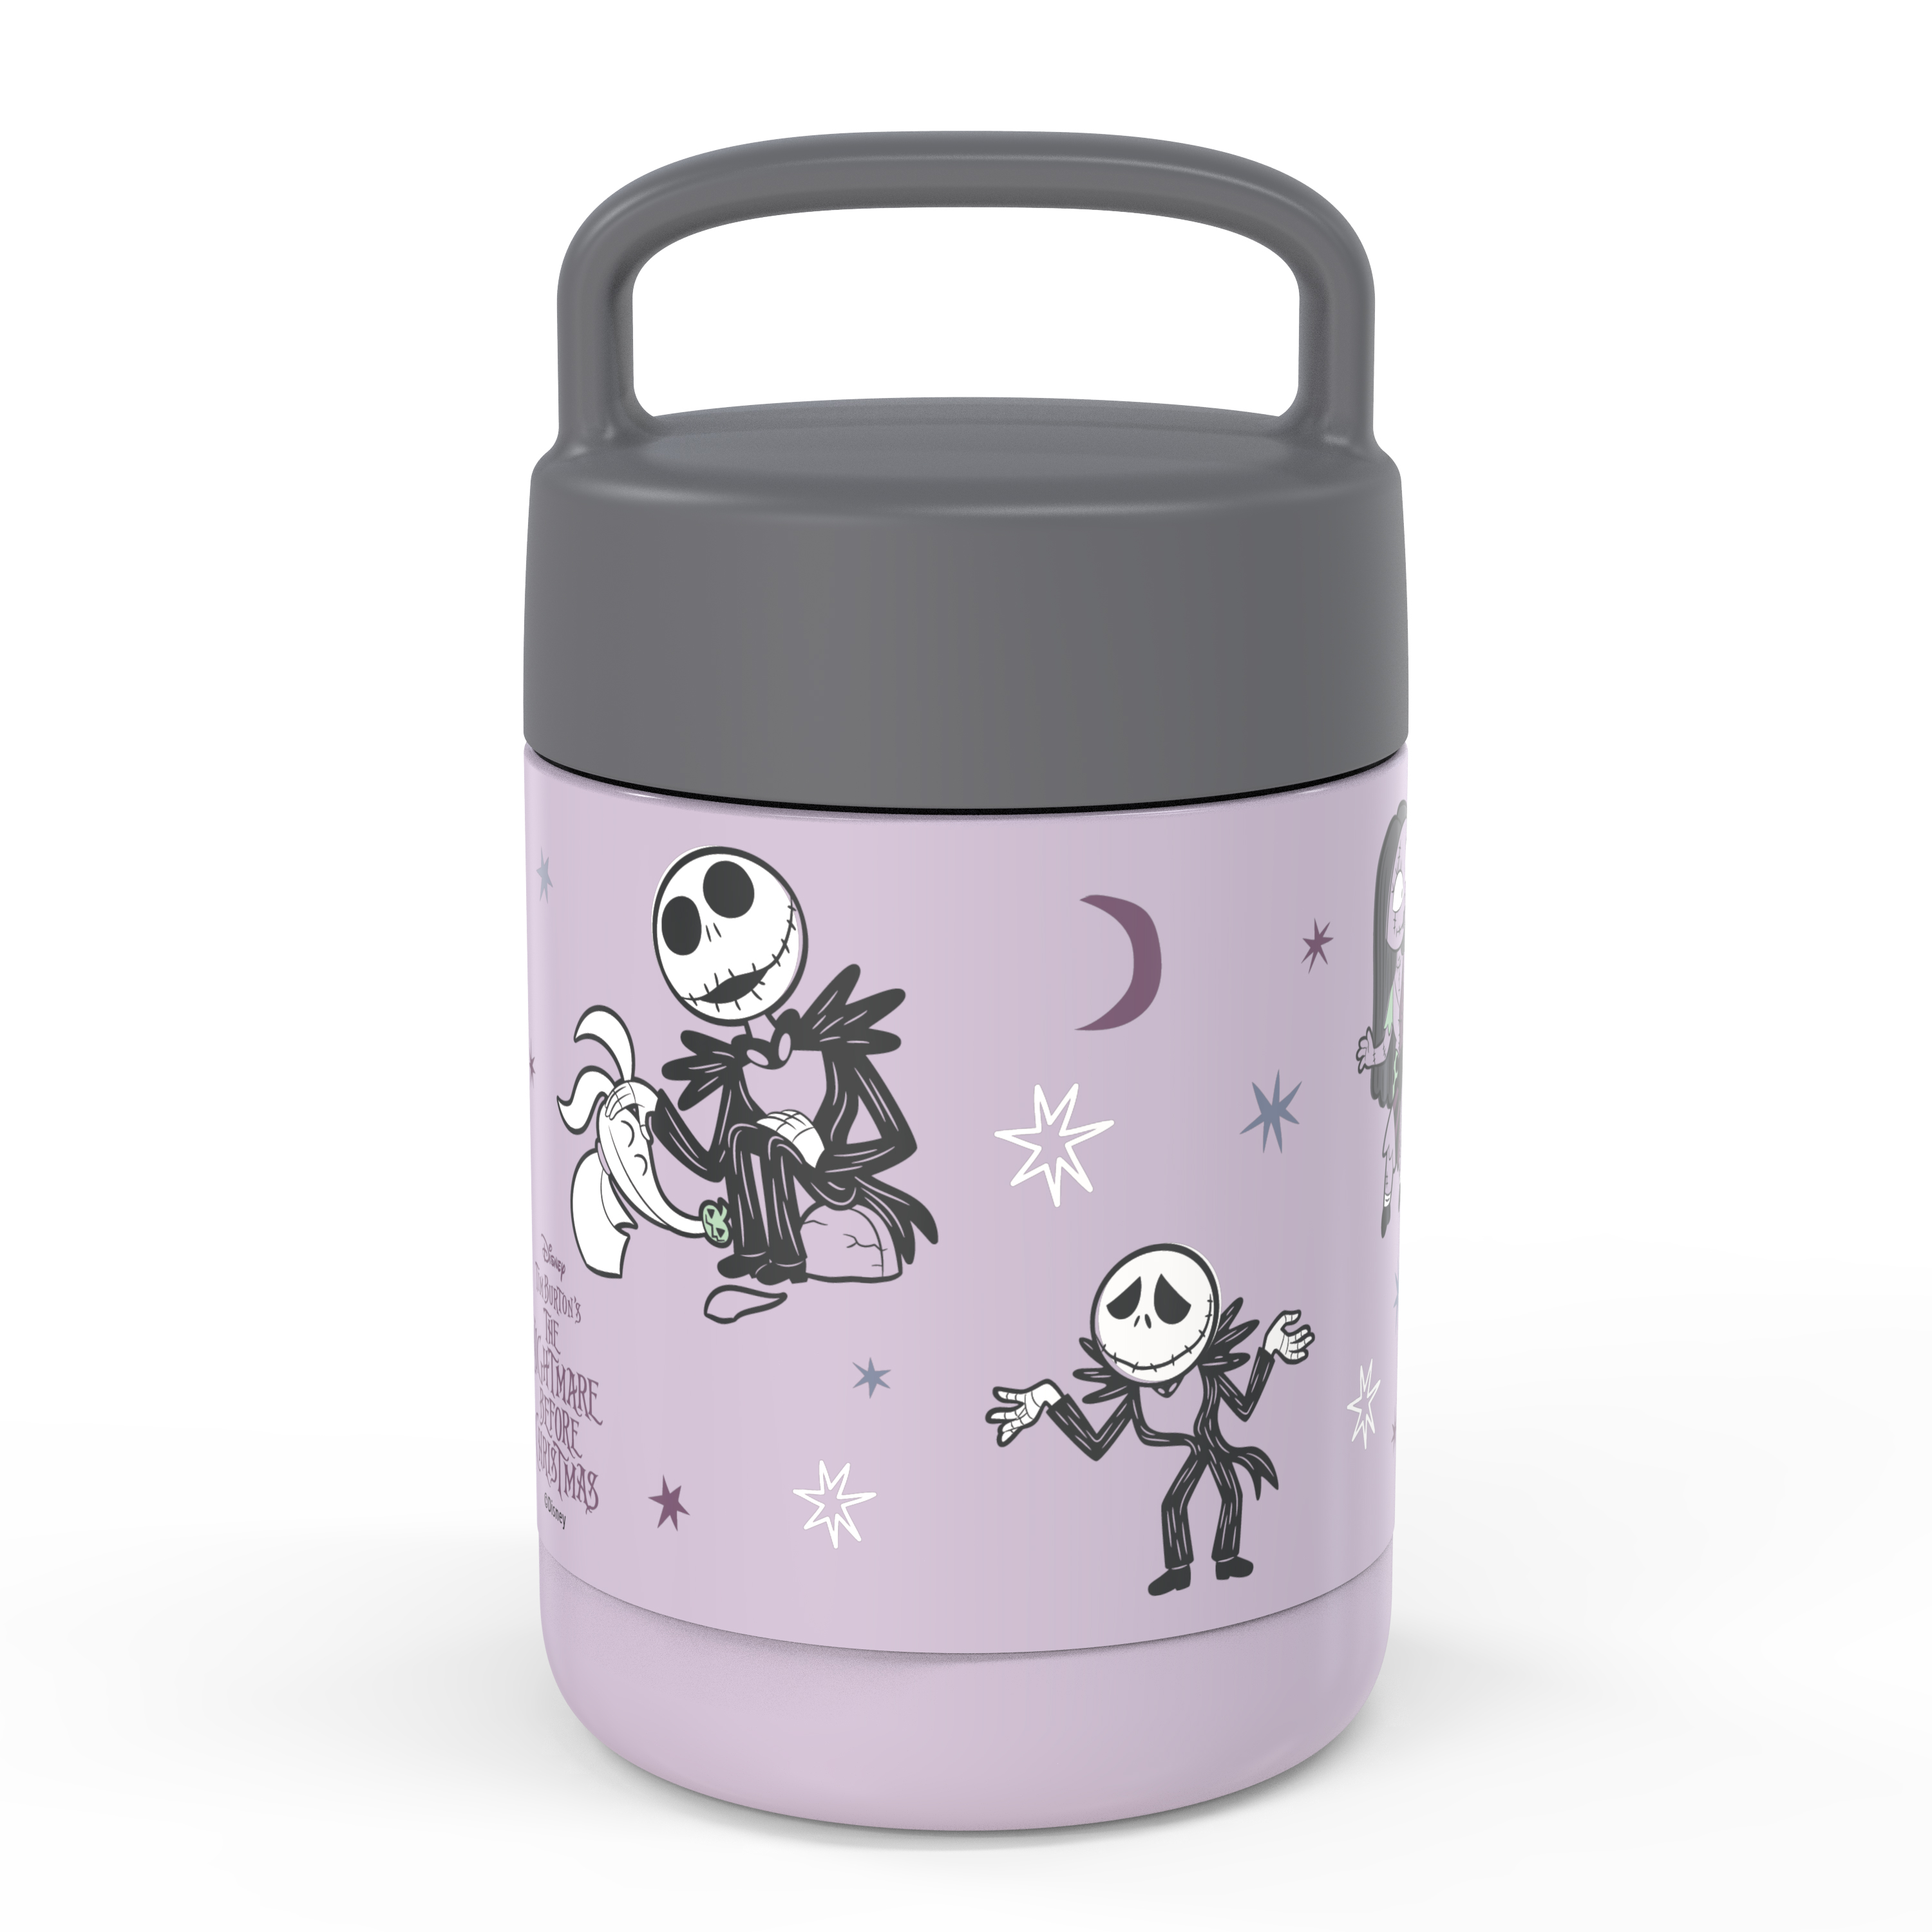 The Nightmare Before Christmas Reusable Vacuum Insulated Stainless Steel Food Container, Jack Skellington & Sally slideshow image 2